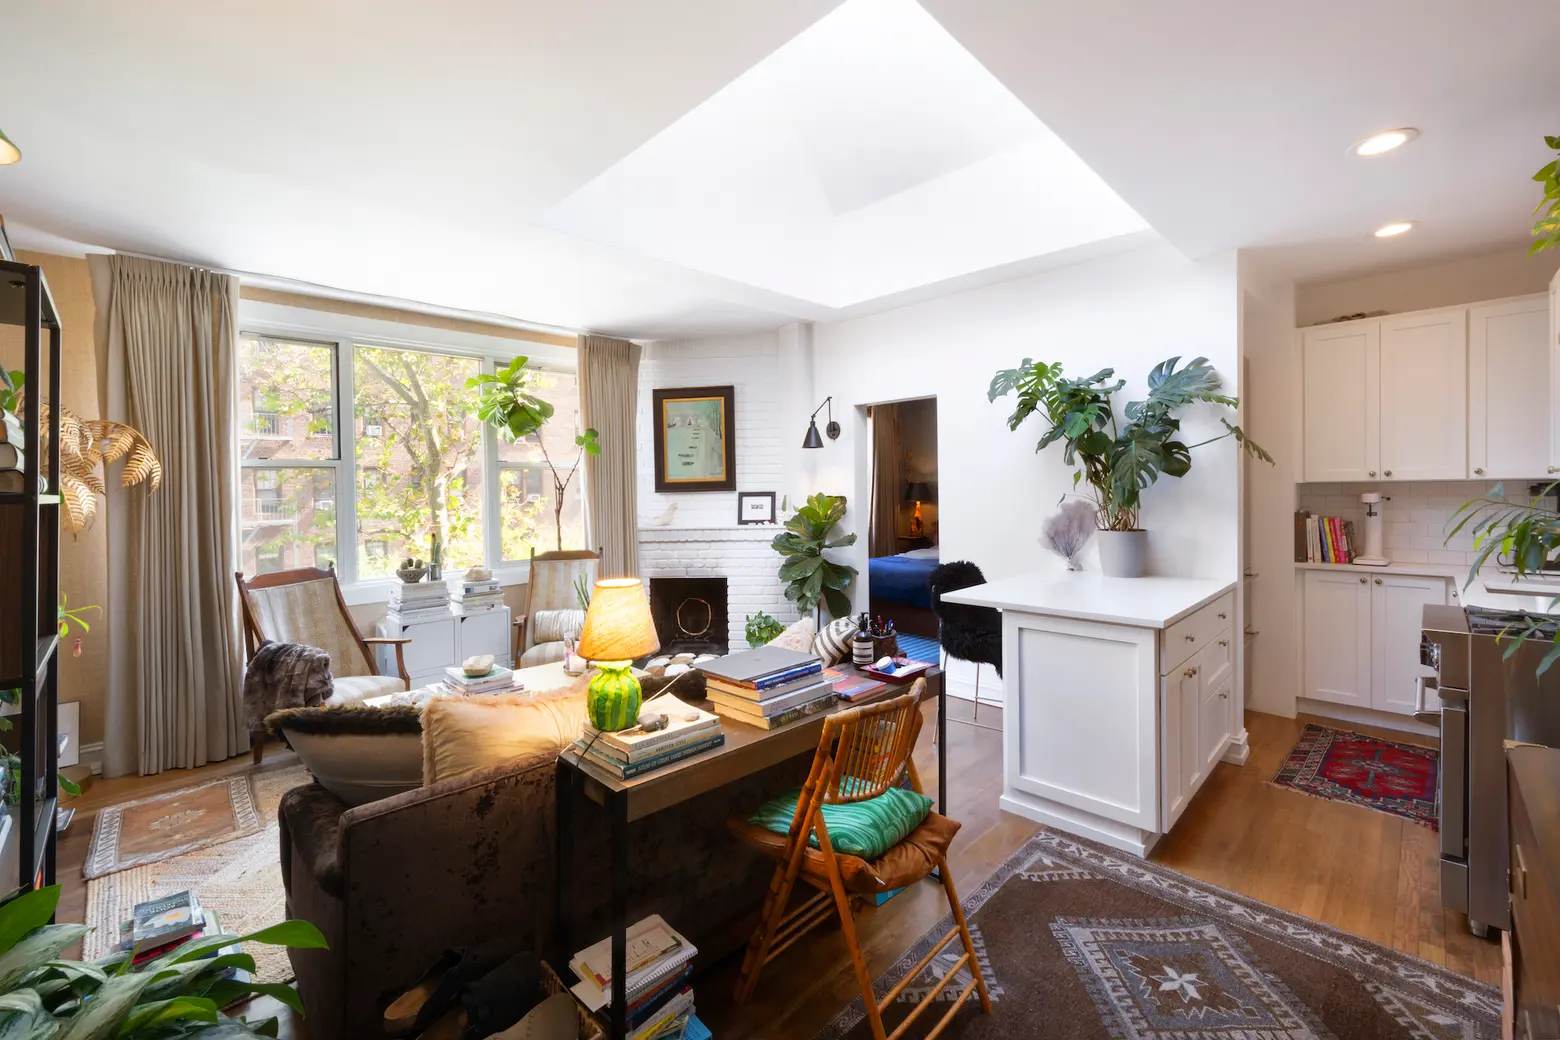 In the West Village, a cozy co-op with a huge skylight and wood-burning fireplace asks $1.15M